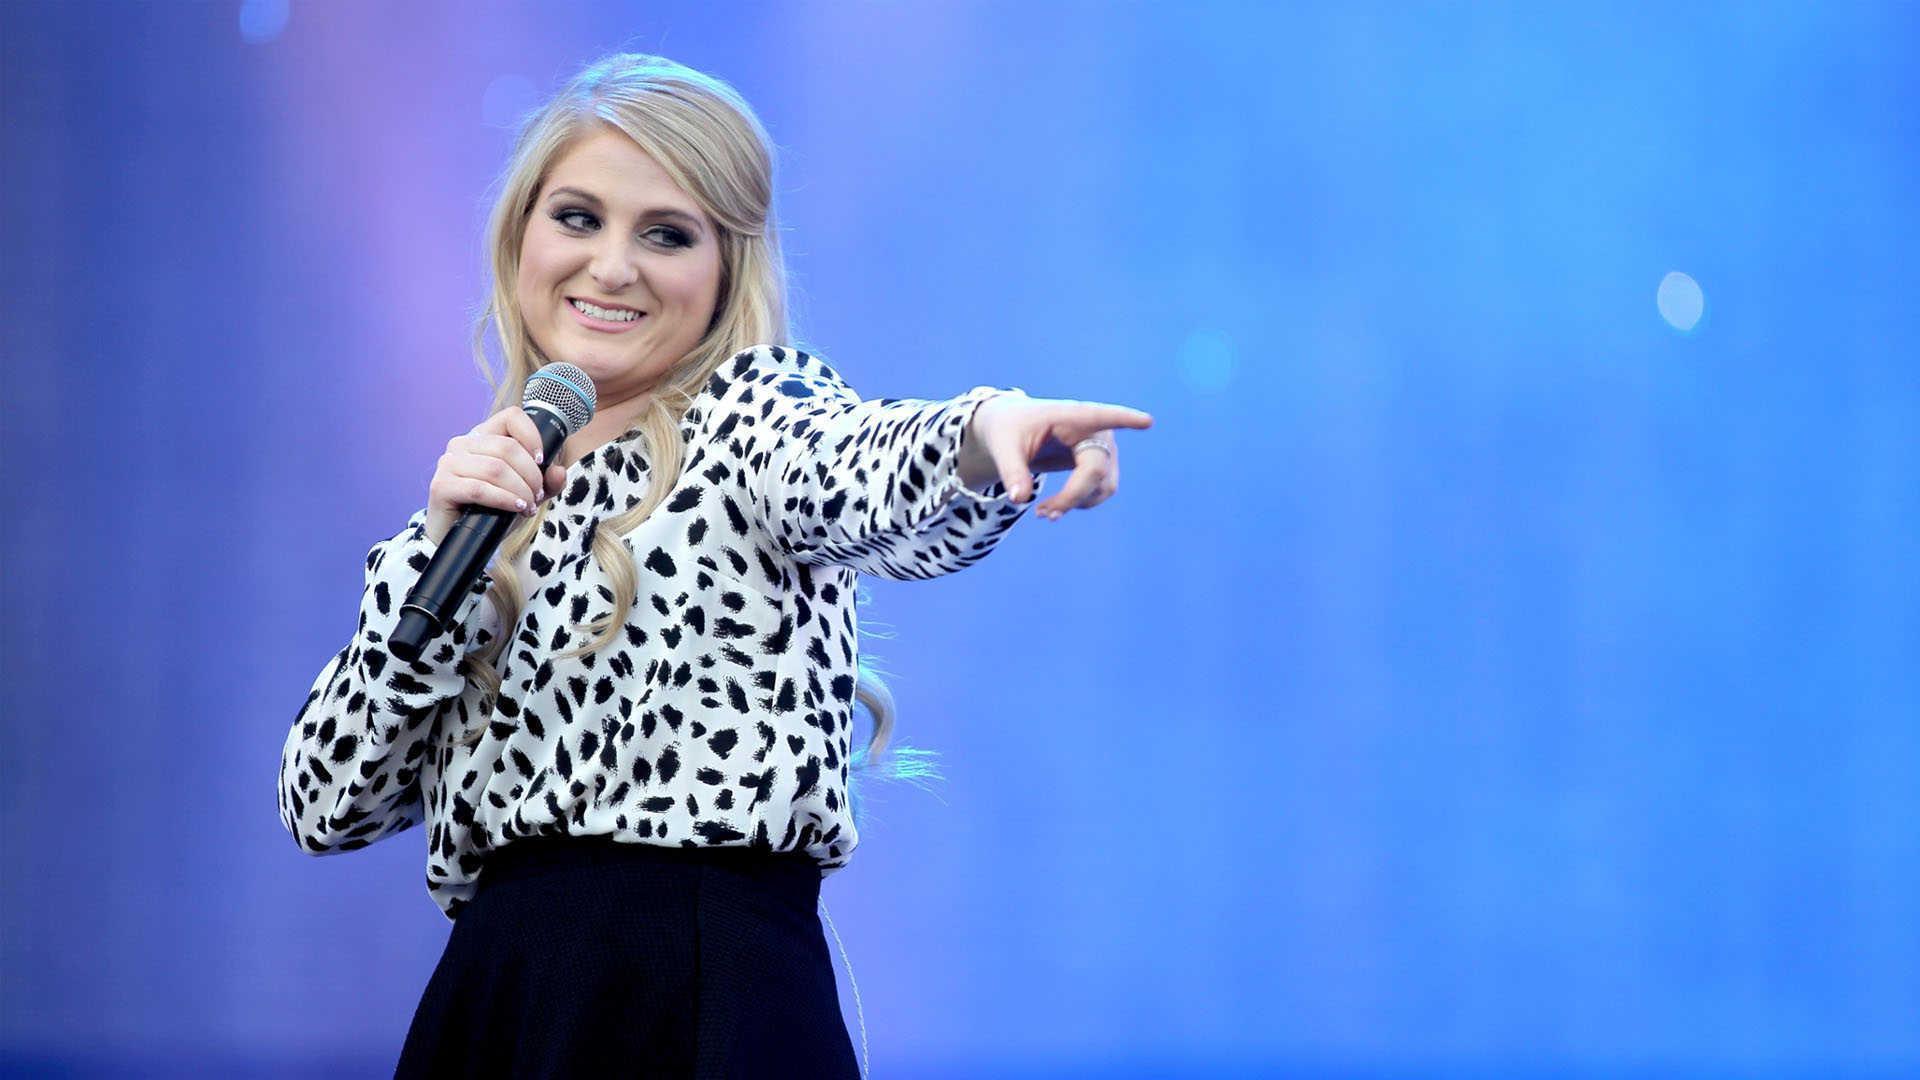 Meghan Trainor Wallpaper High Resolution and Quality Download